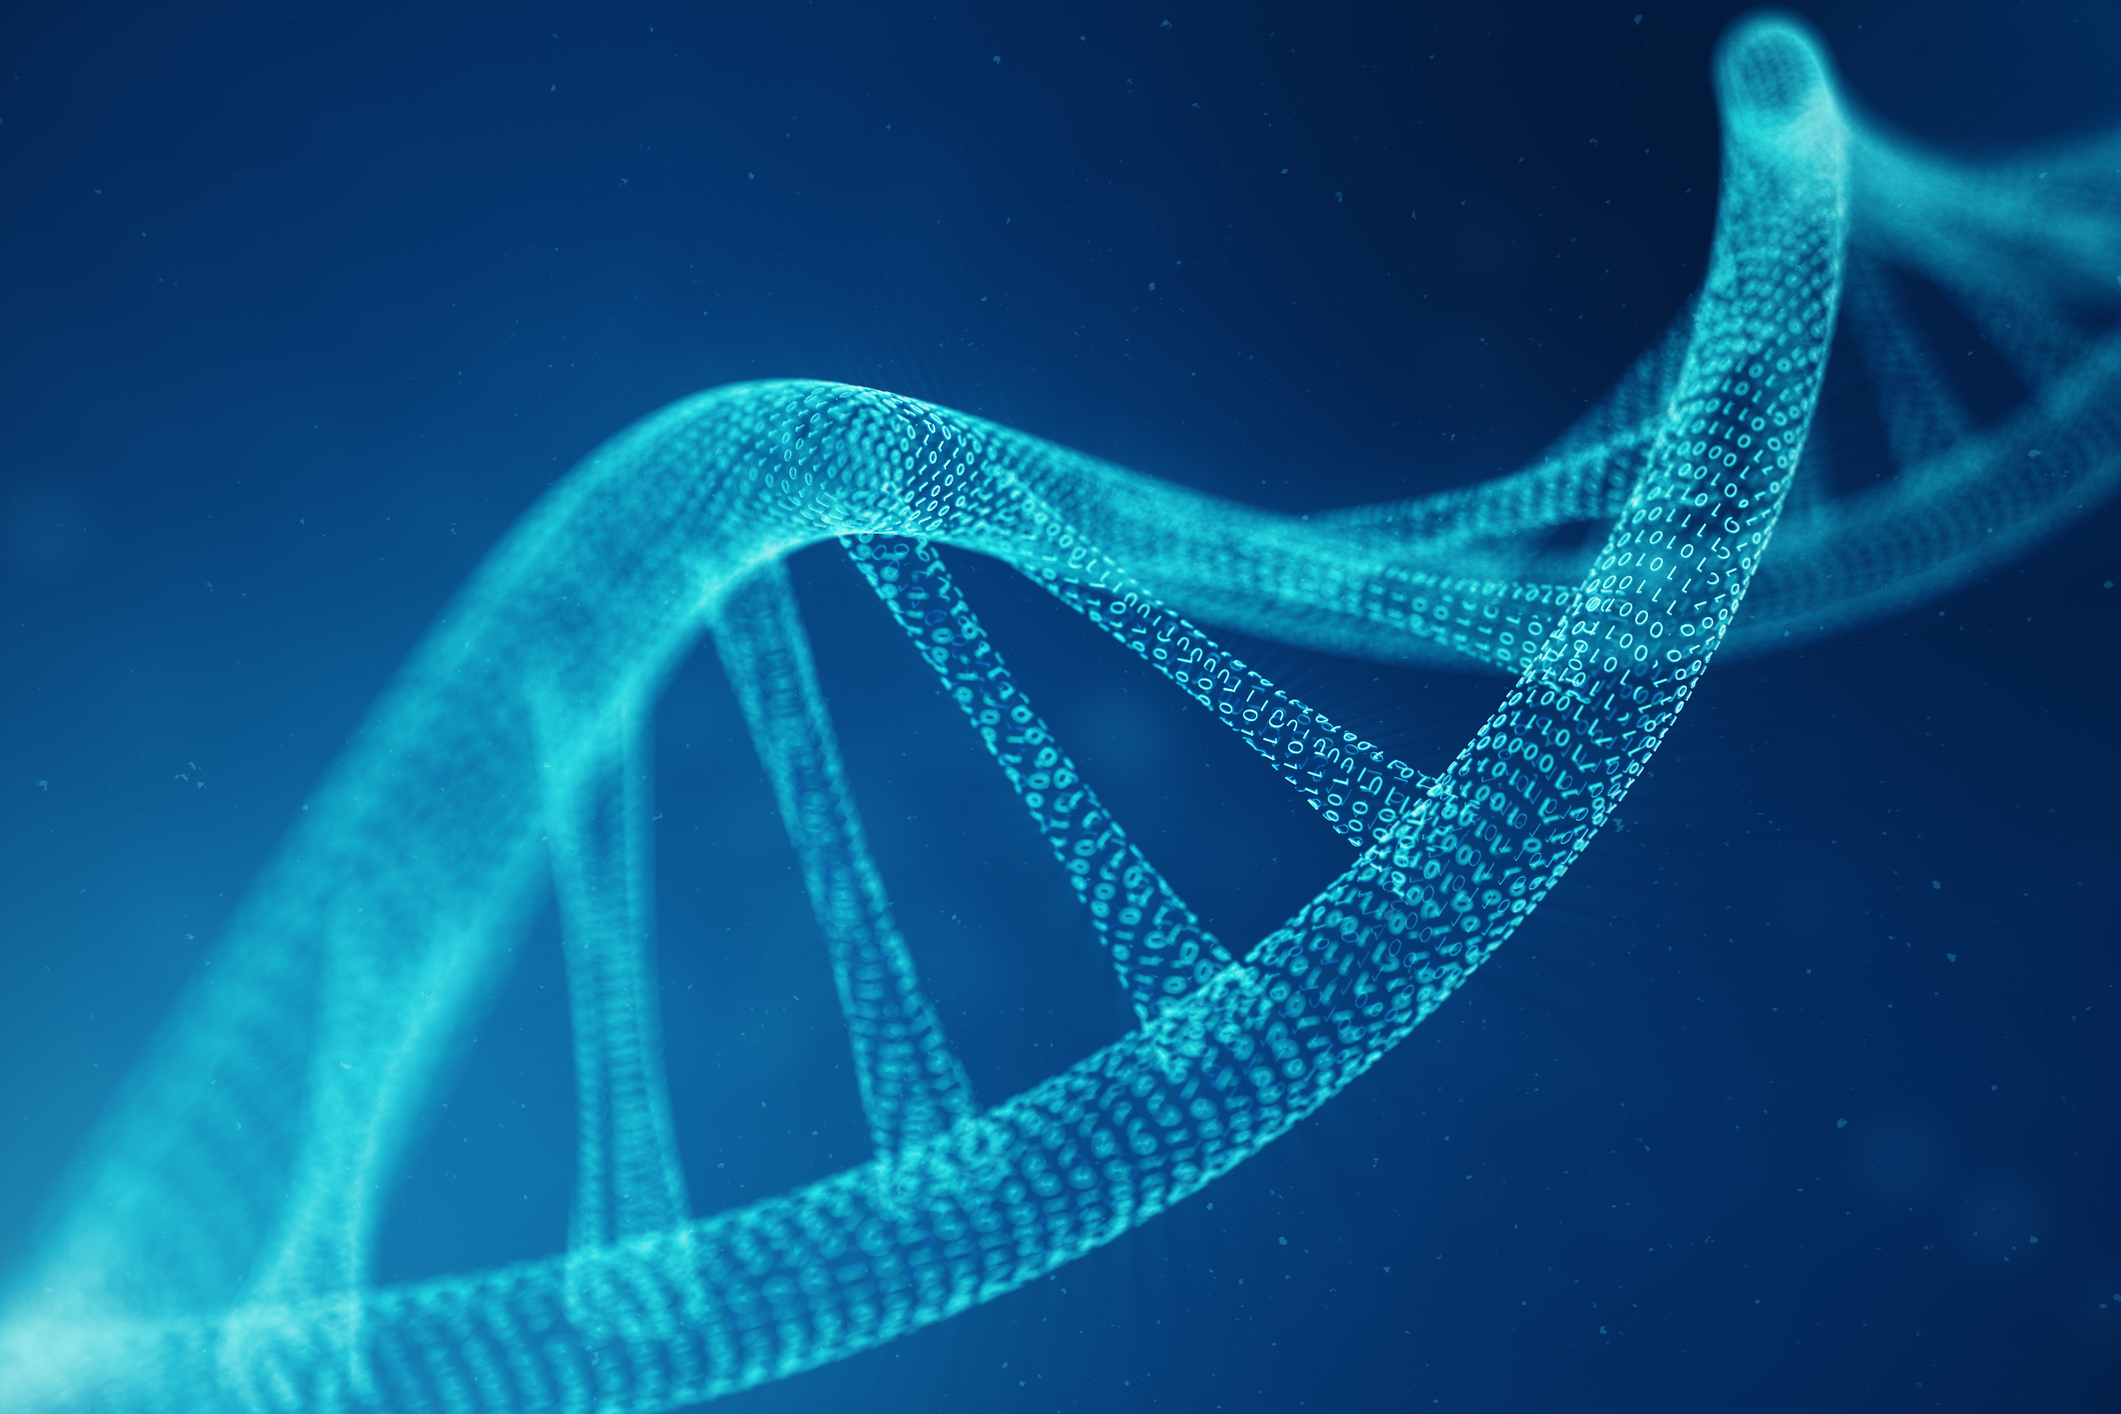 C2i Genomics extends collaboration with AstraZeneca following successful solid cancer testing